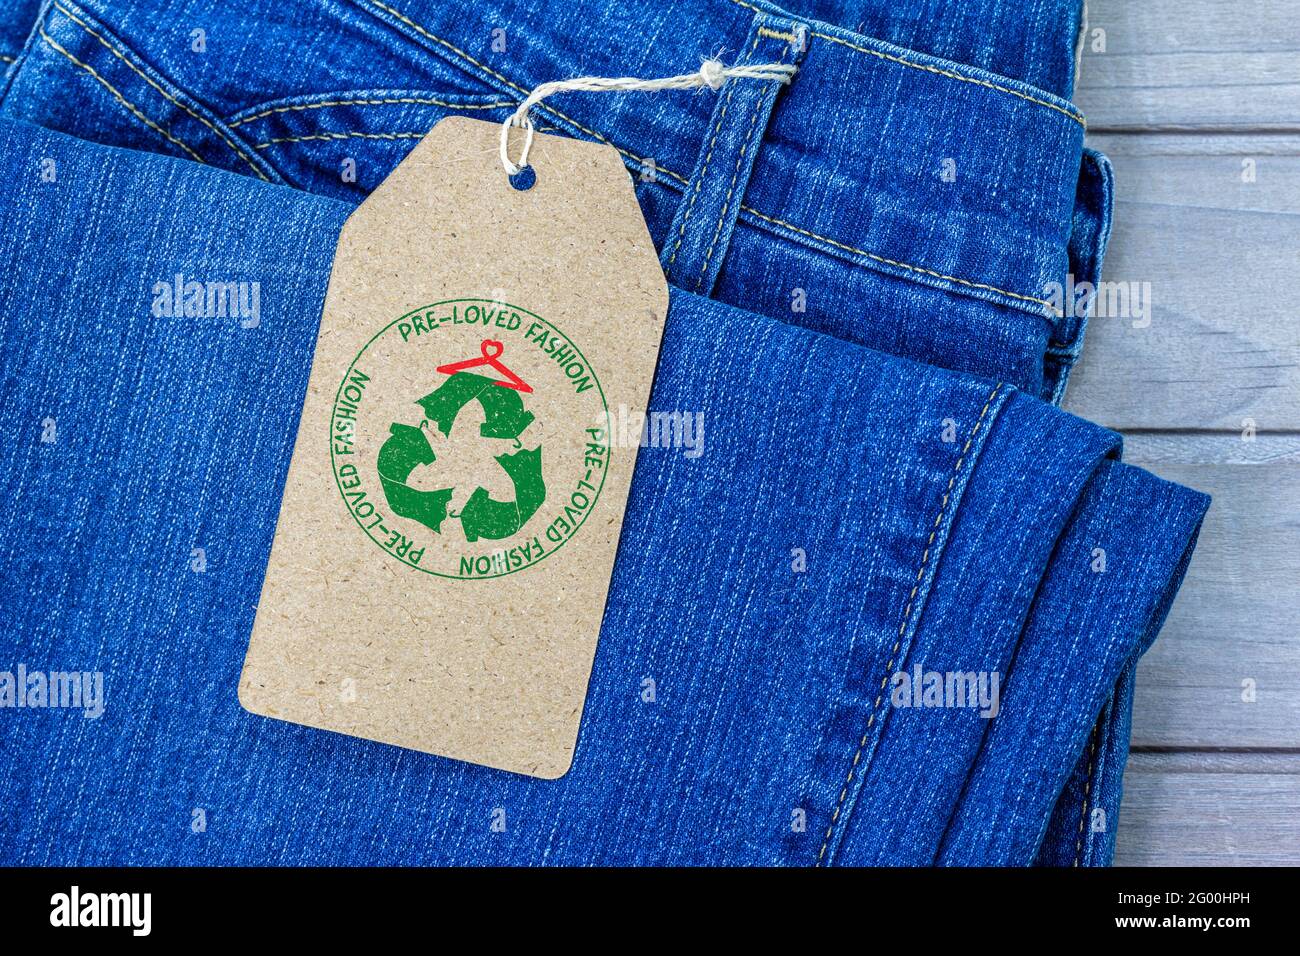 pre loved fashion label on second hand jeans, sustainable fashion Stock Photo